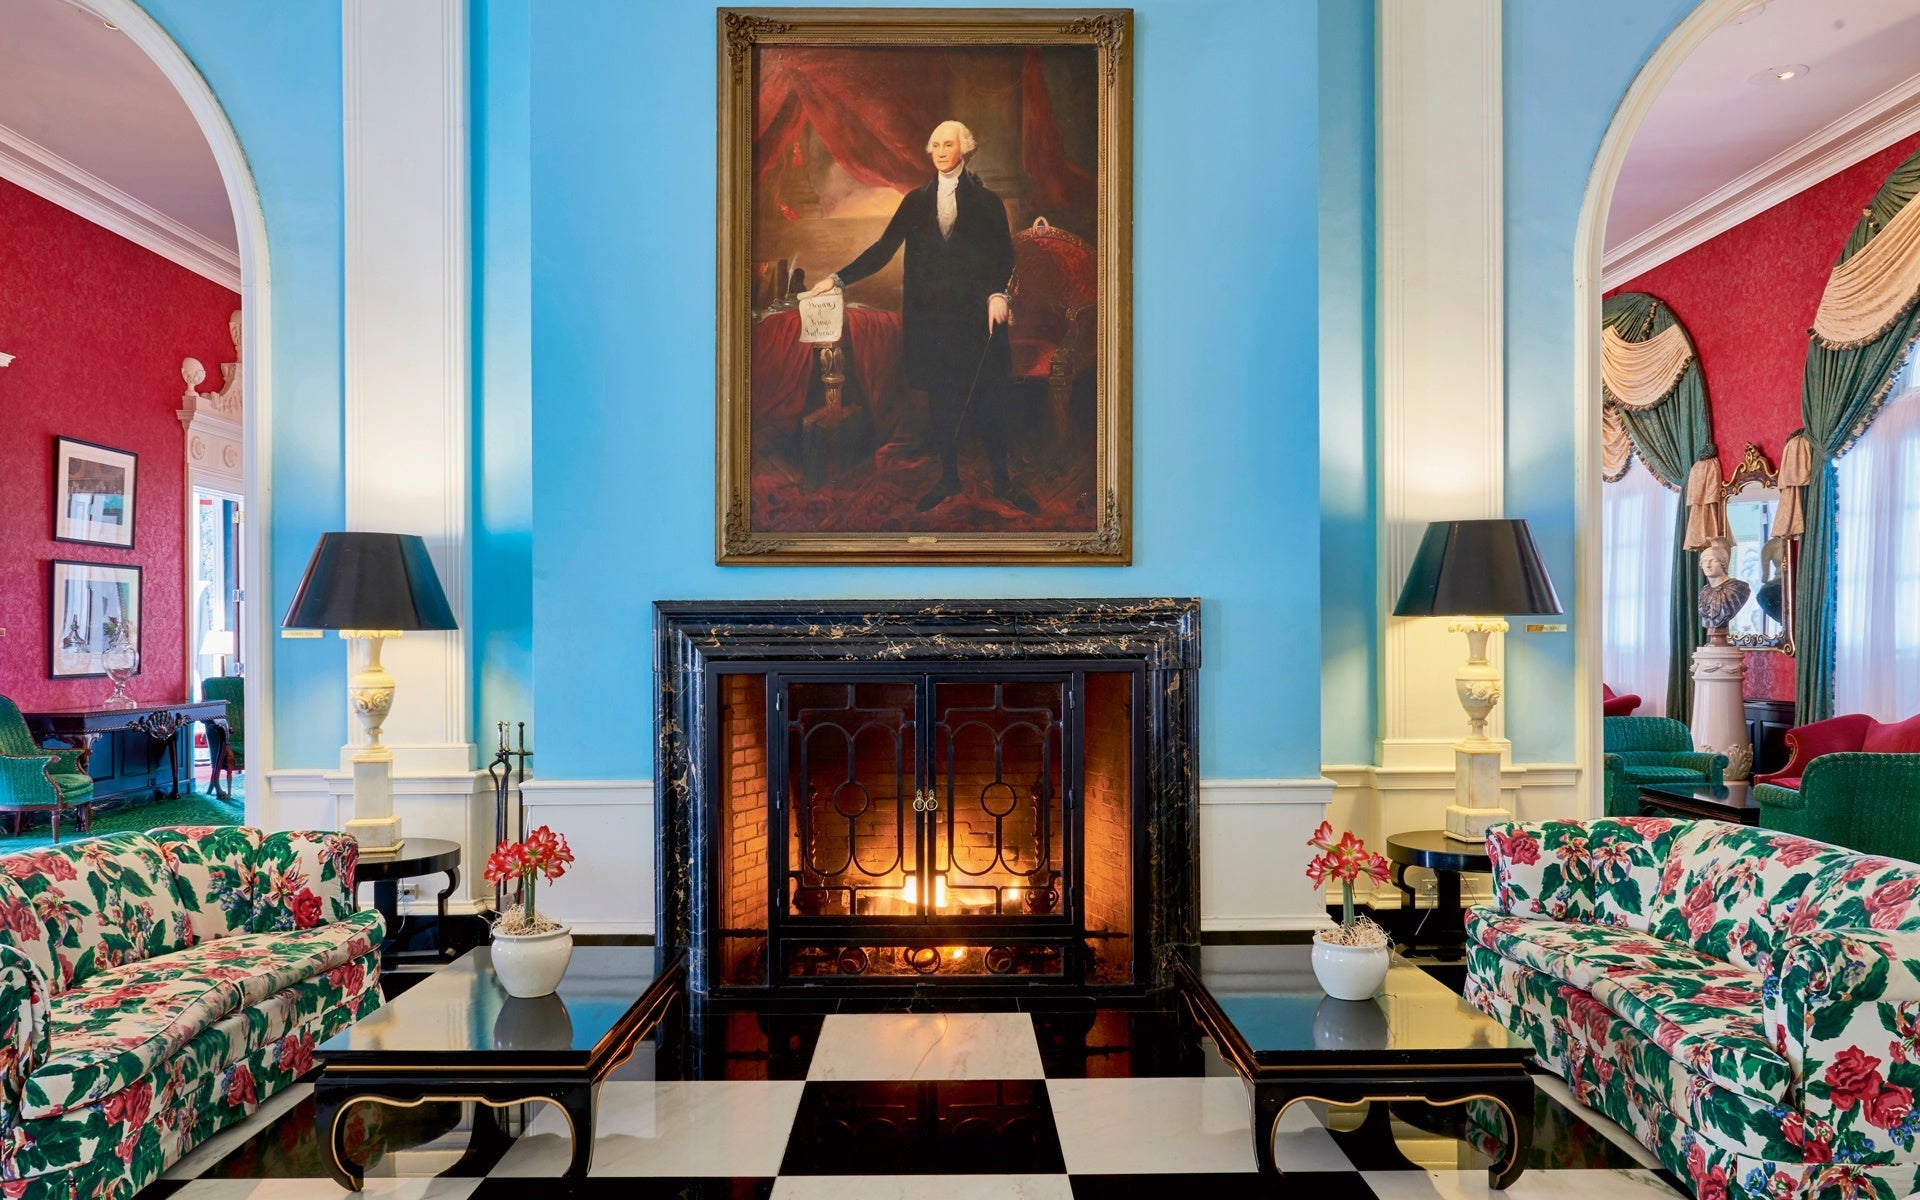 Romance & Rhododendrons - My Love Affair with America's Resort - The Greenbrier